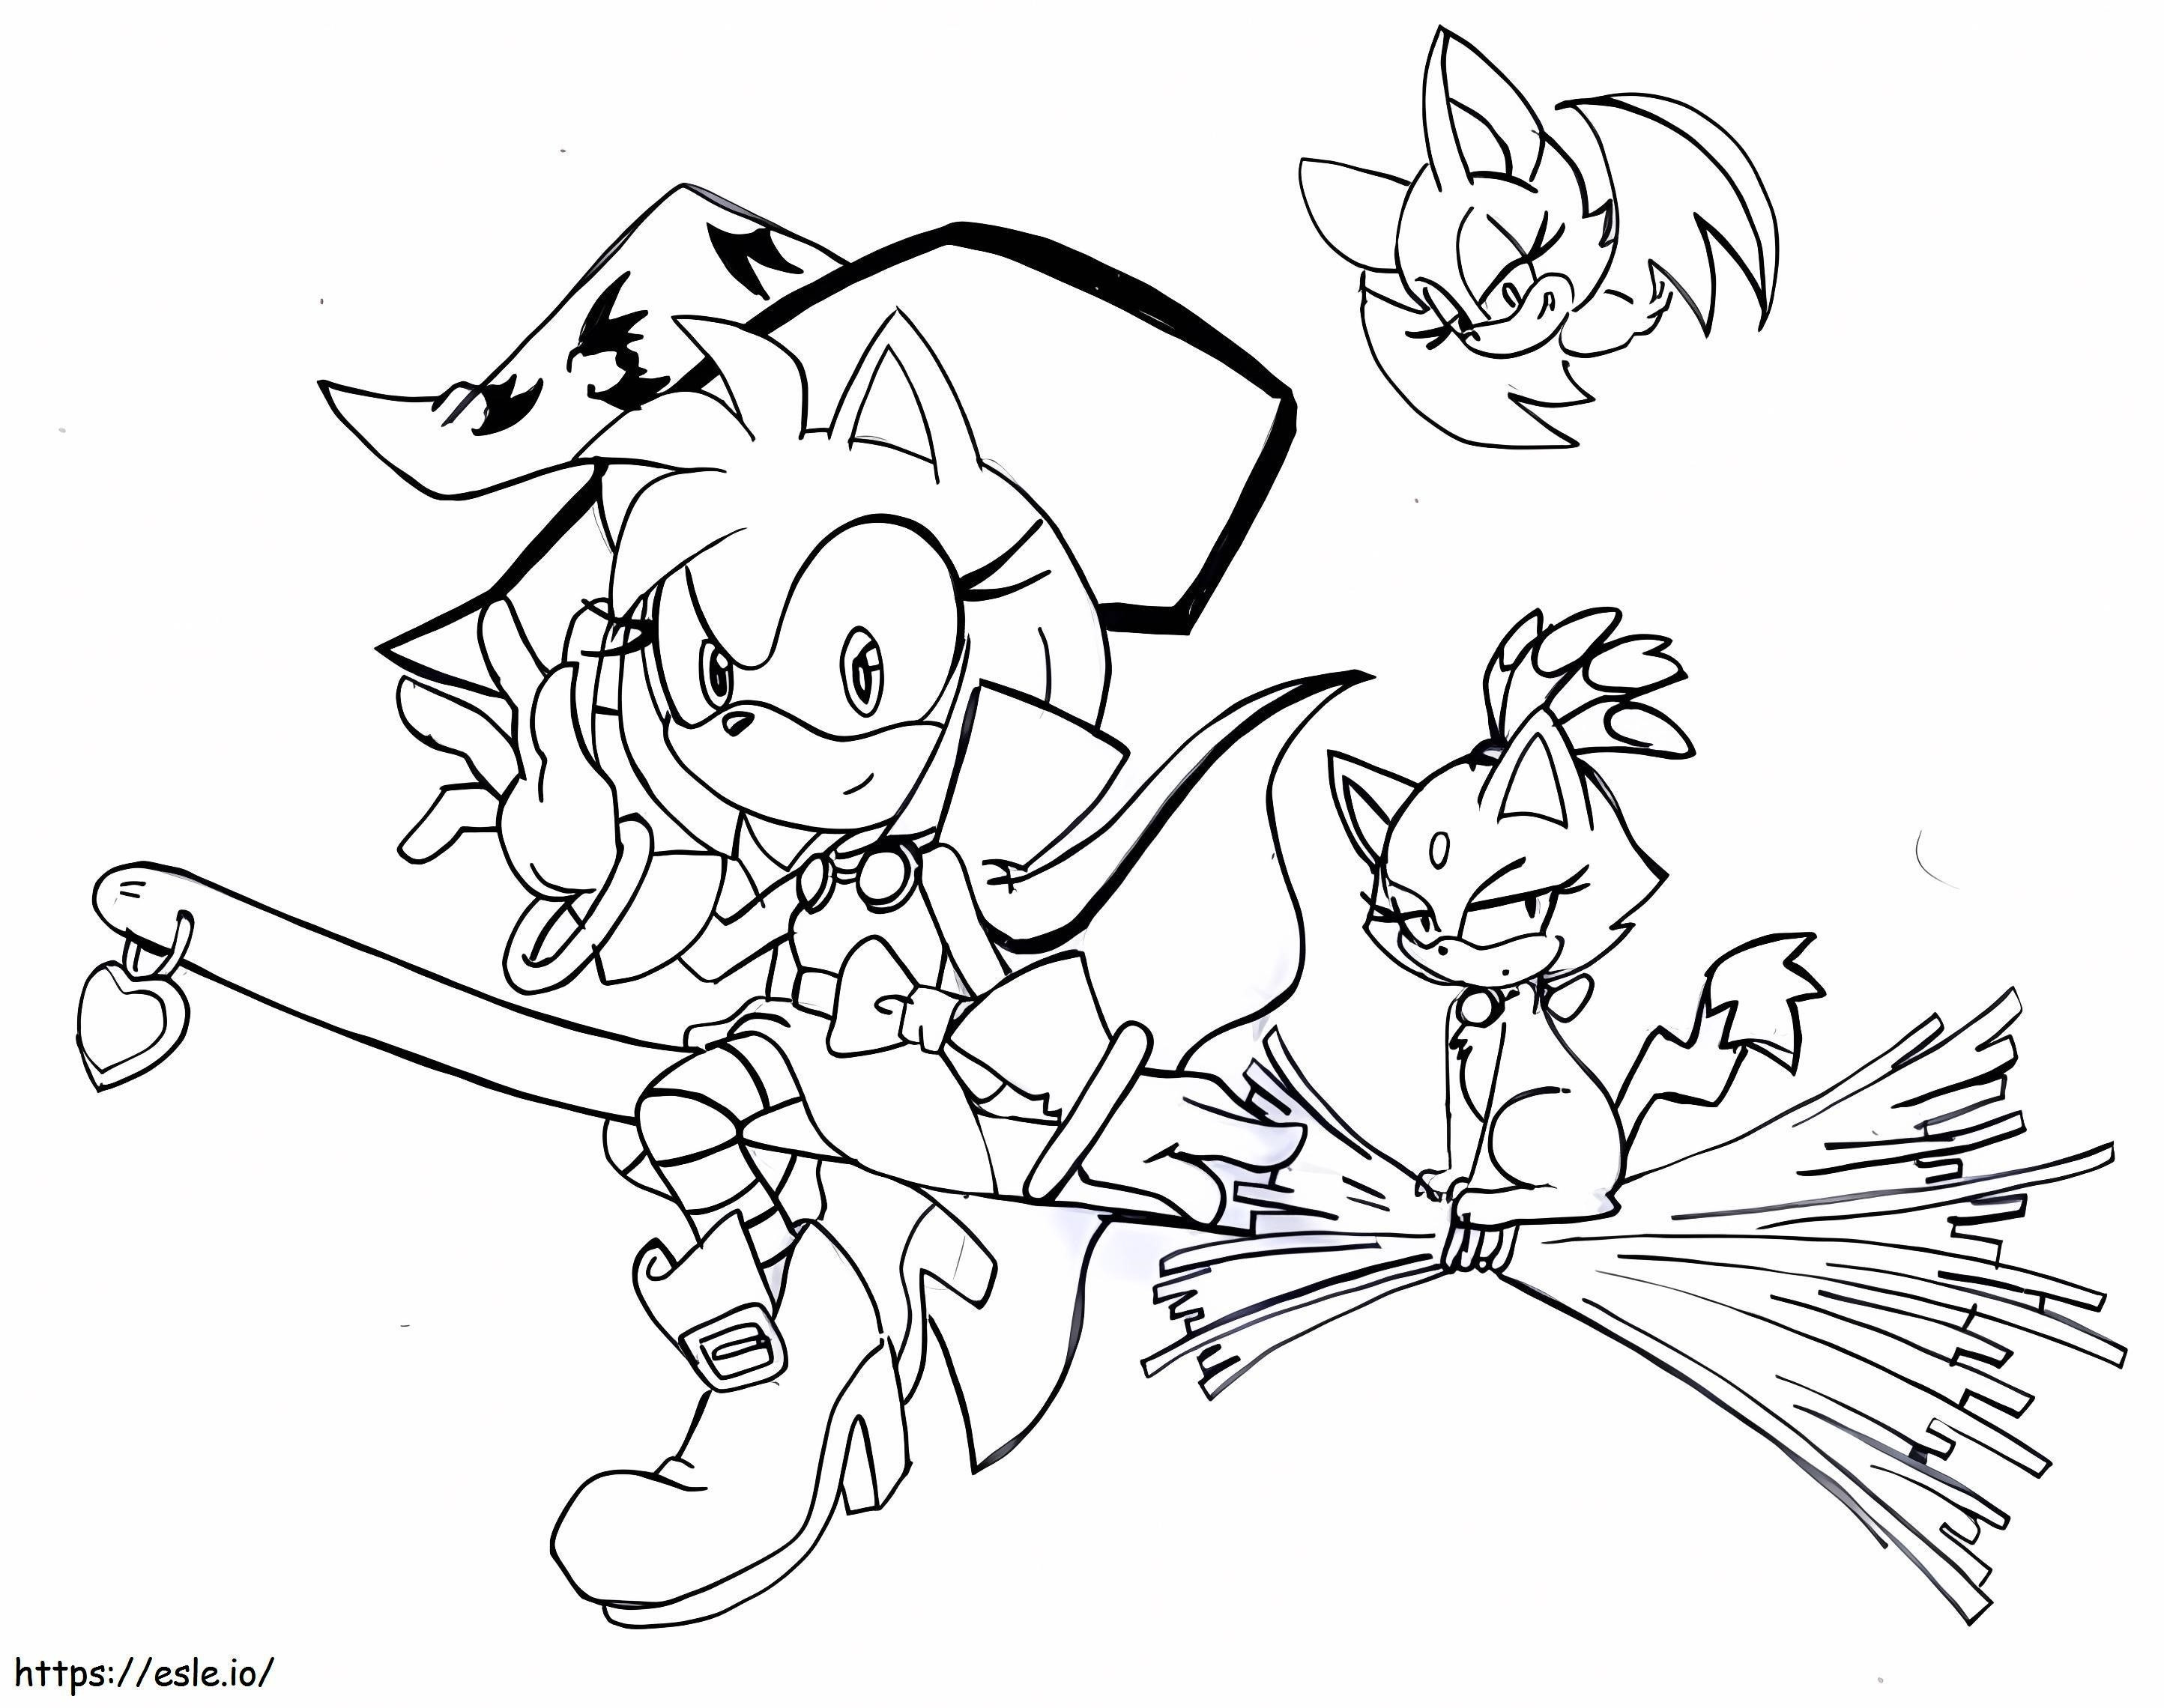 Amy Rose The Witch coloring page